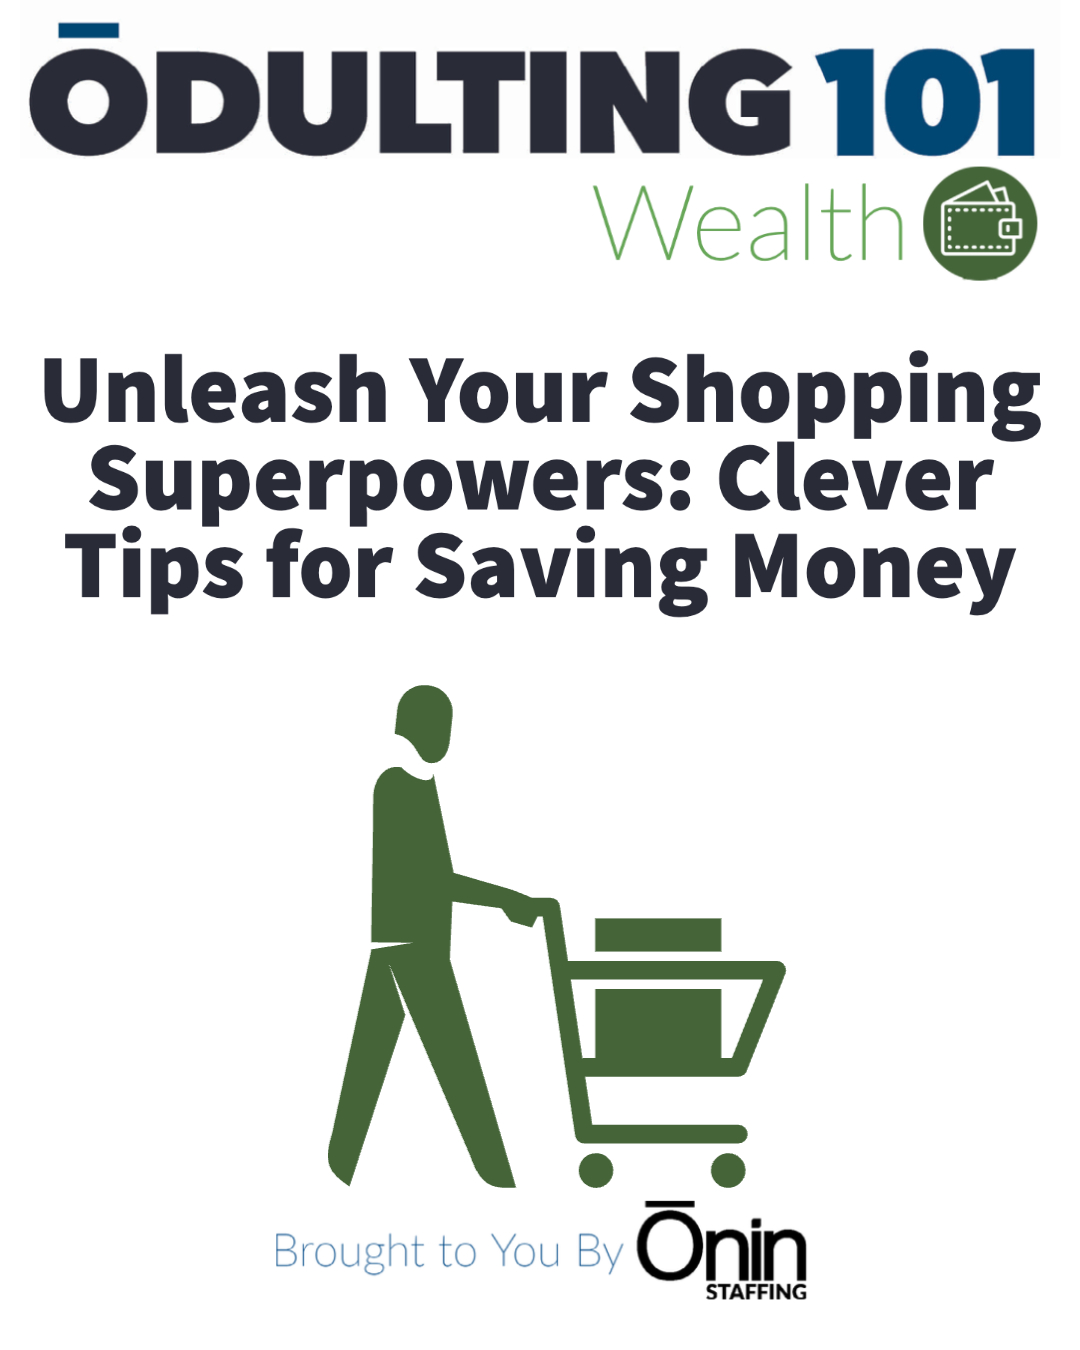 Image featuring the title 'Unleash Your Shopping Superpowers: Clever Tips for Saving Money' with Odulting logo, a line drawing of a person pushing a shopping cart, and 'Brought to you by Onin Staffing' text.